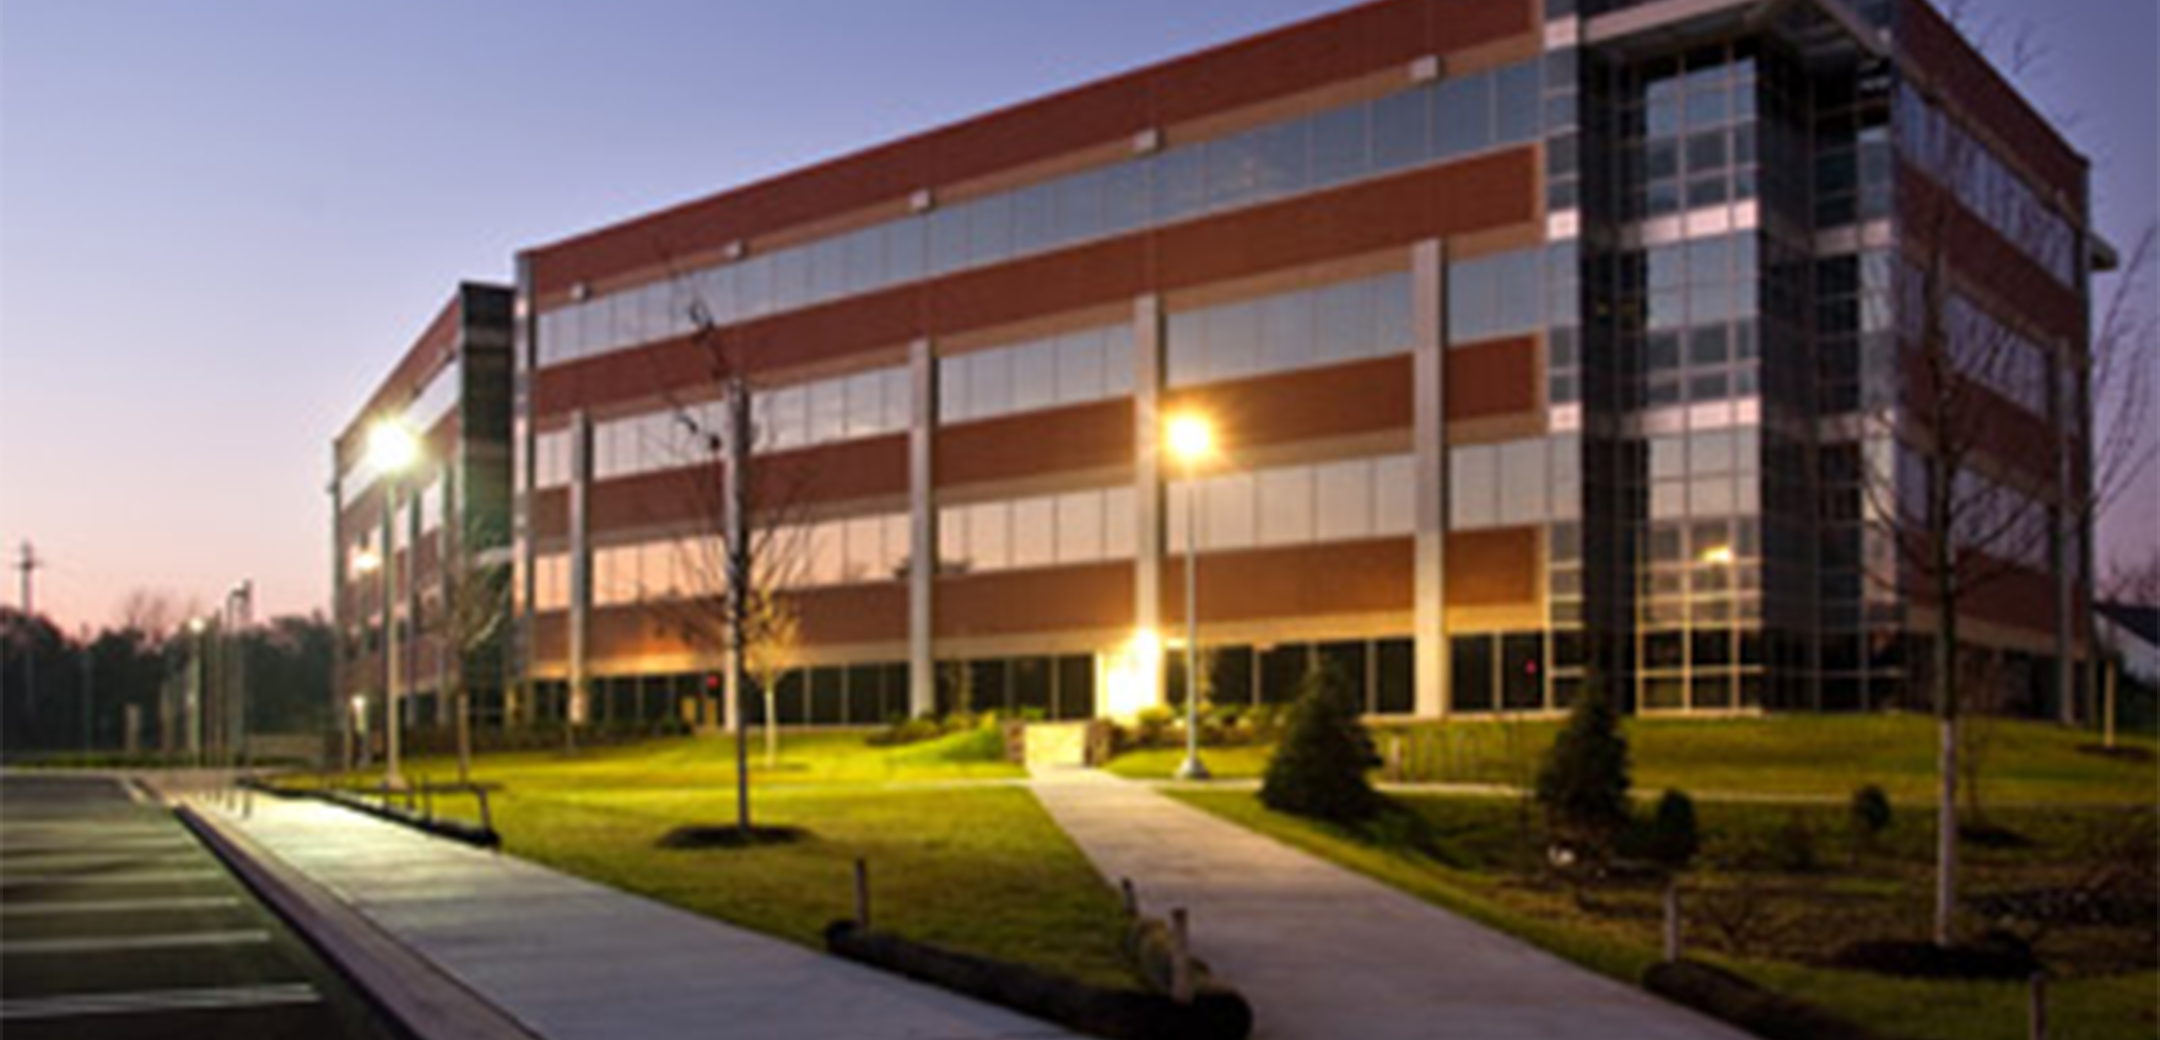 The back side exterior of a 4 story Floral Vale building during dusk featuring the backside parking lot view.